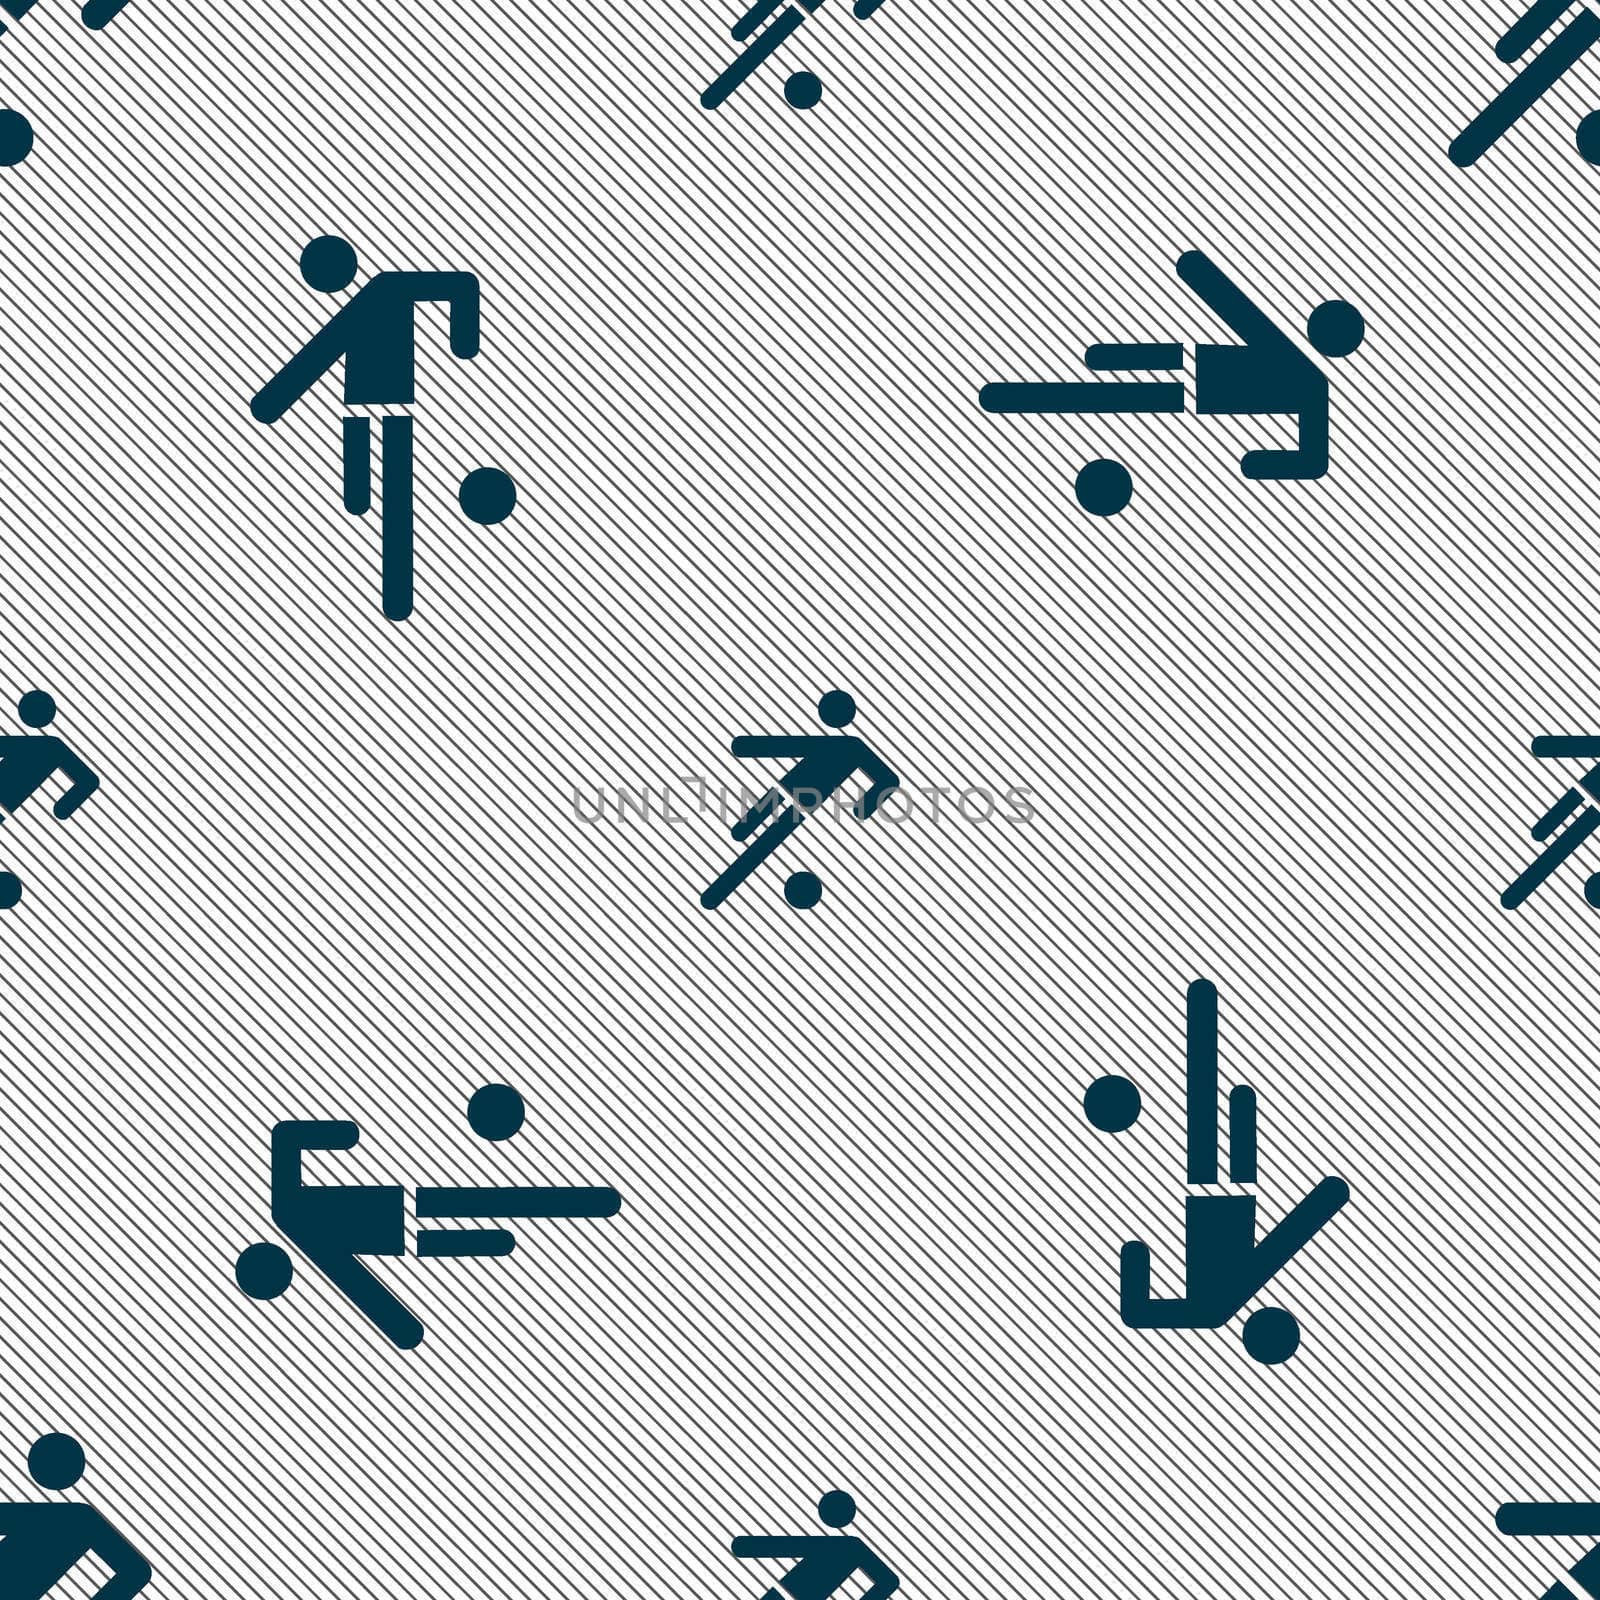 football player icon. Seamless pattern with geometric texture. illustration